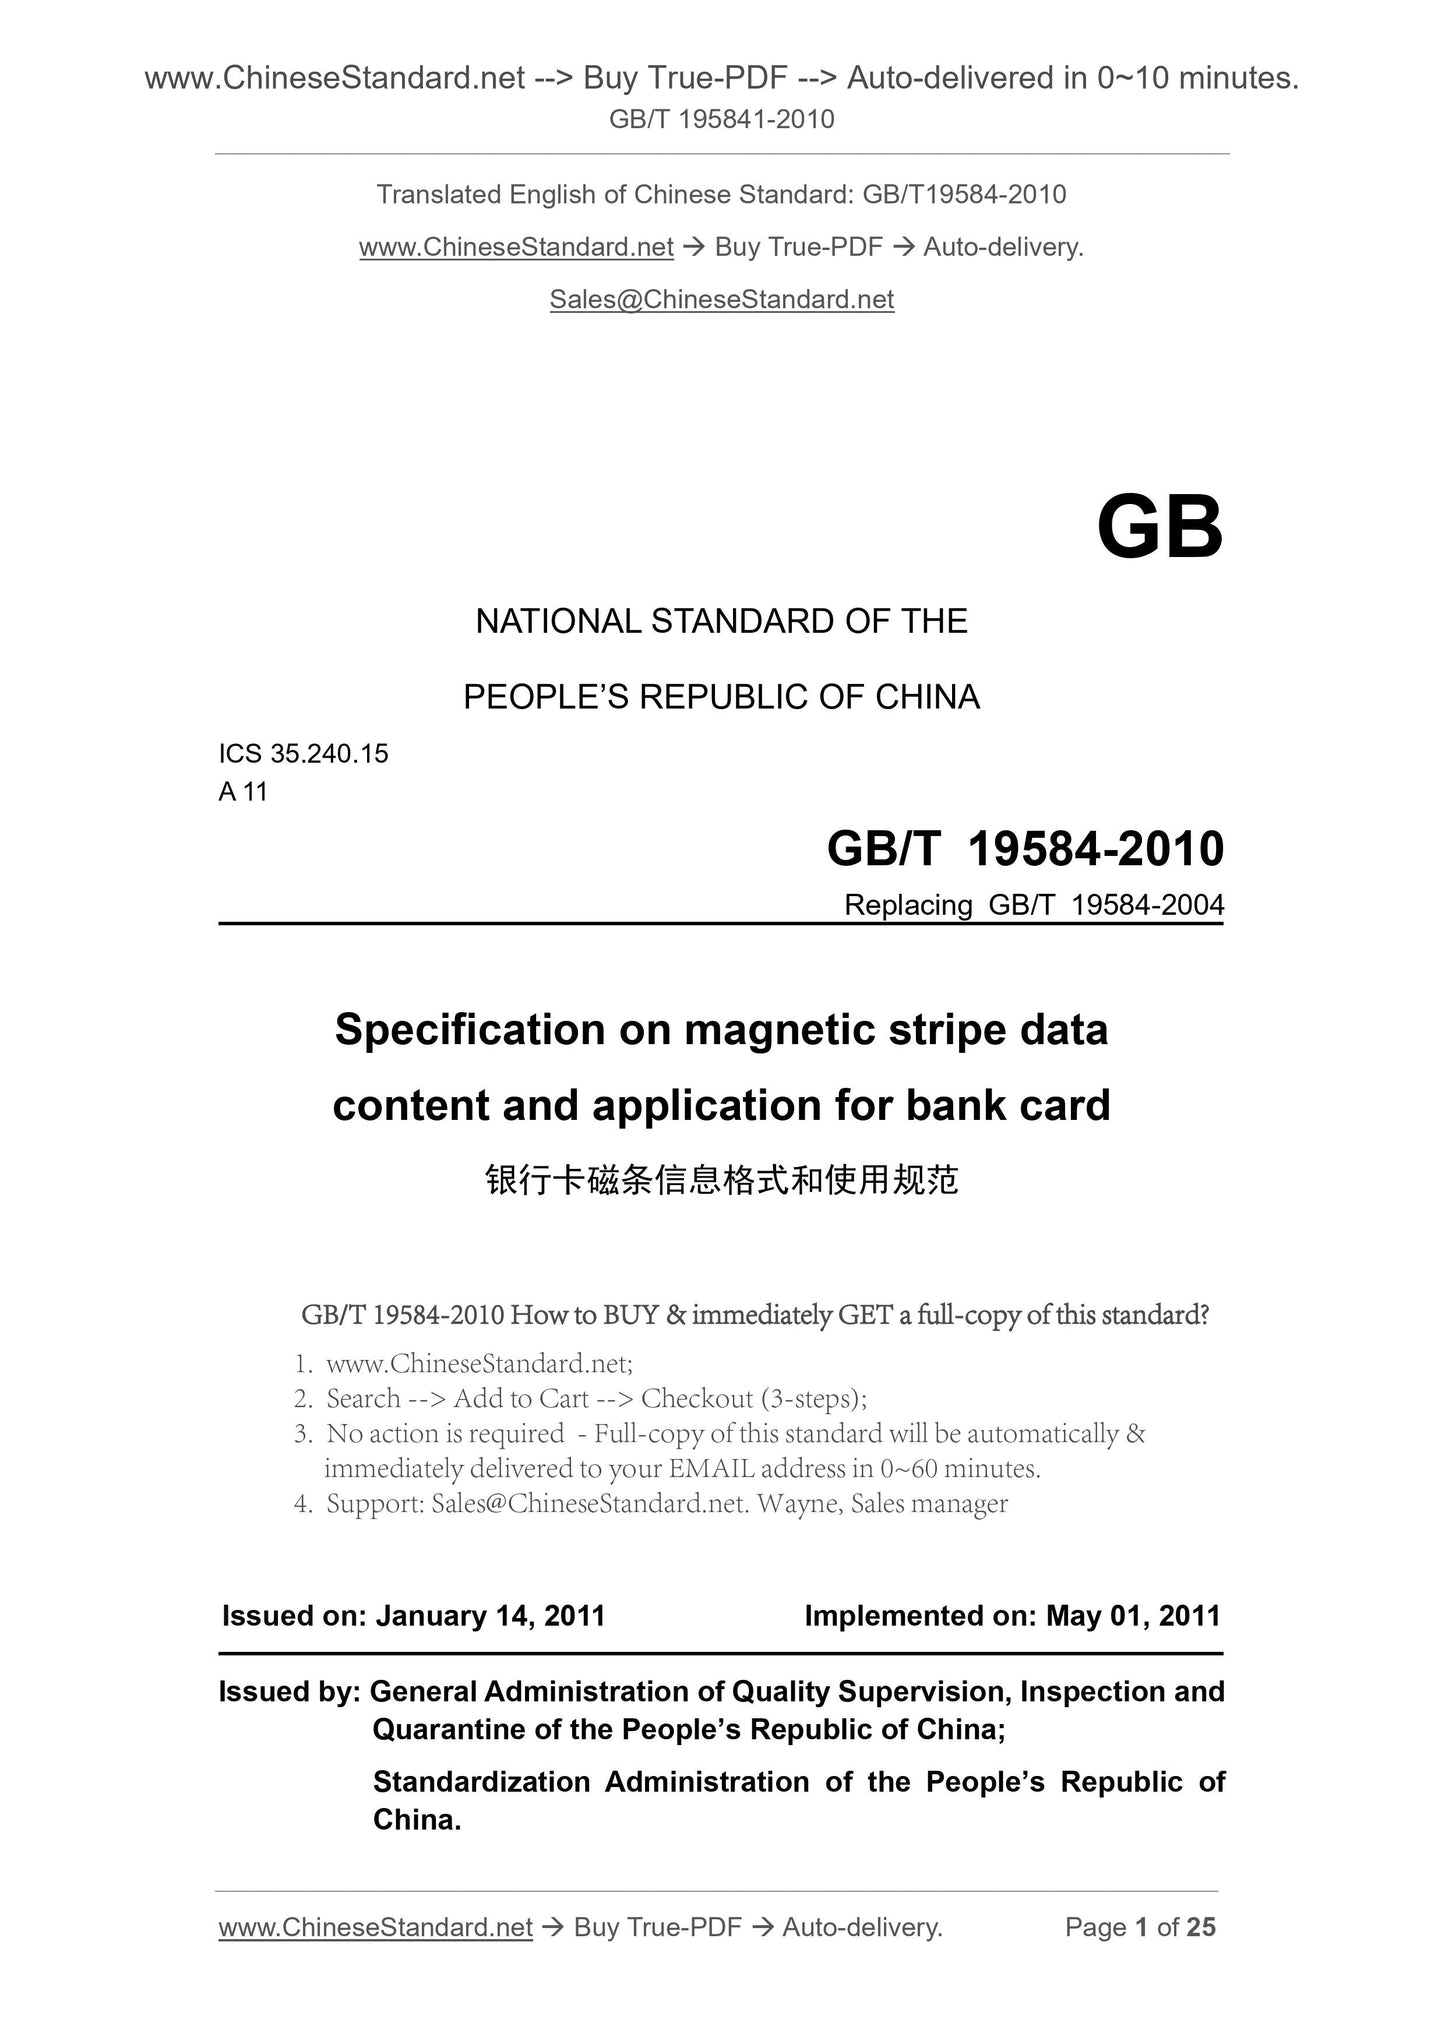 GB/T 19584-2010 Page 1